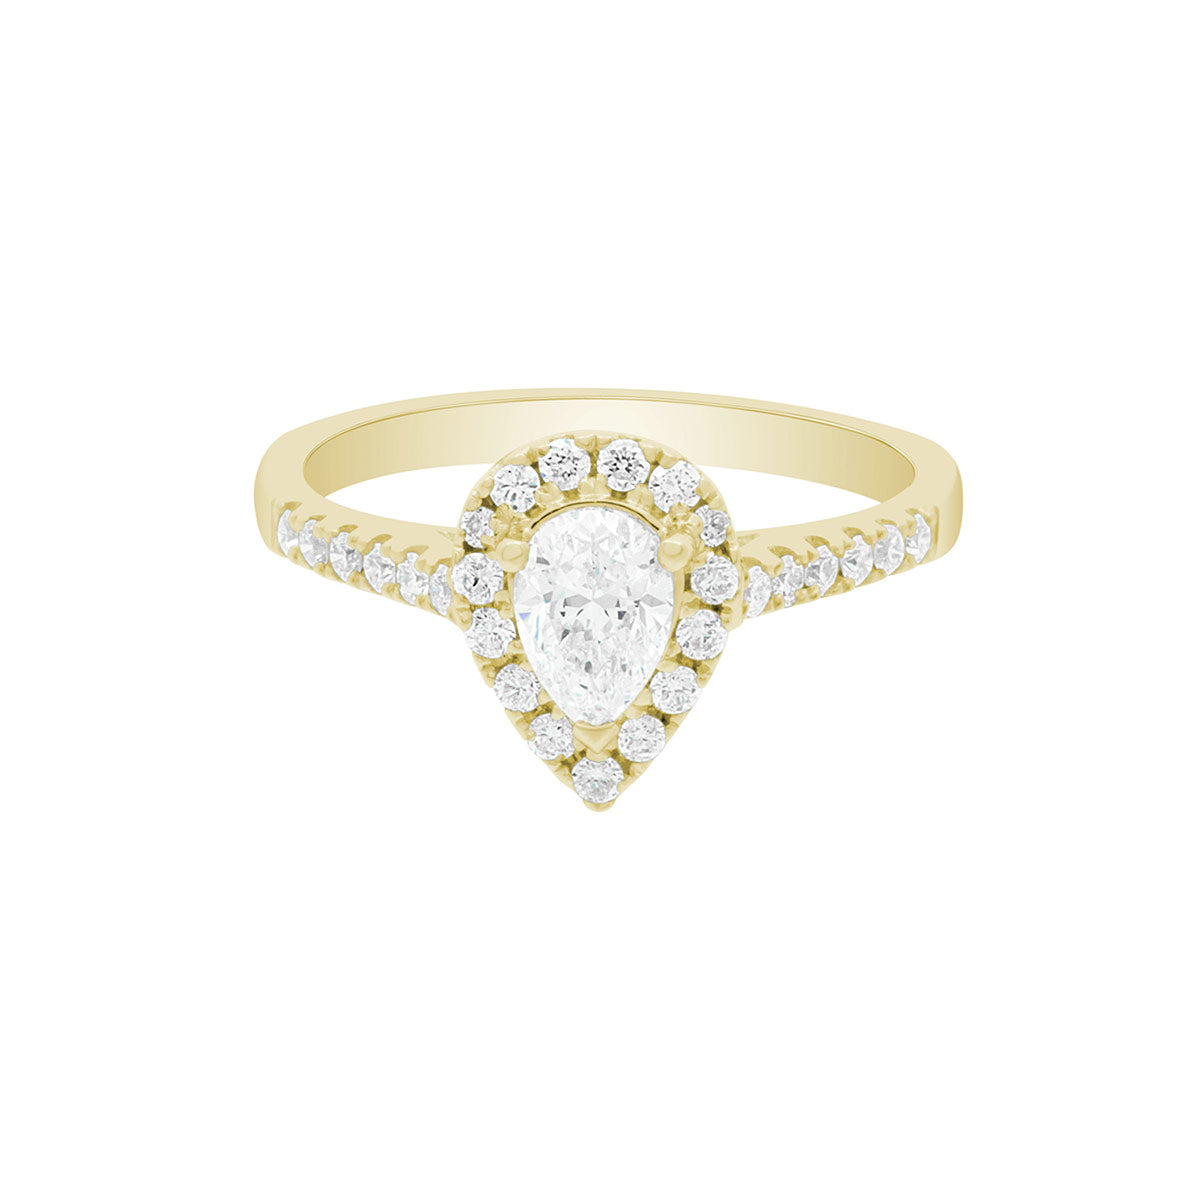 Pear Cut Halo Ring made of yellow gold and diamonds,, LAYING ON A WHITE SURFACE WITH A WHITE BACKGROUND